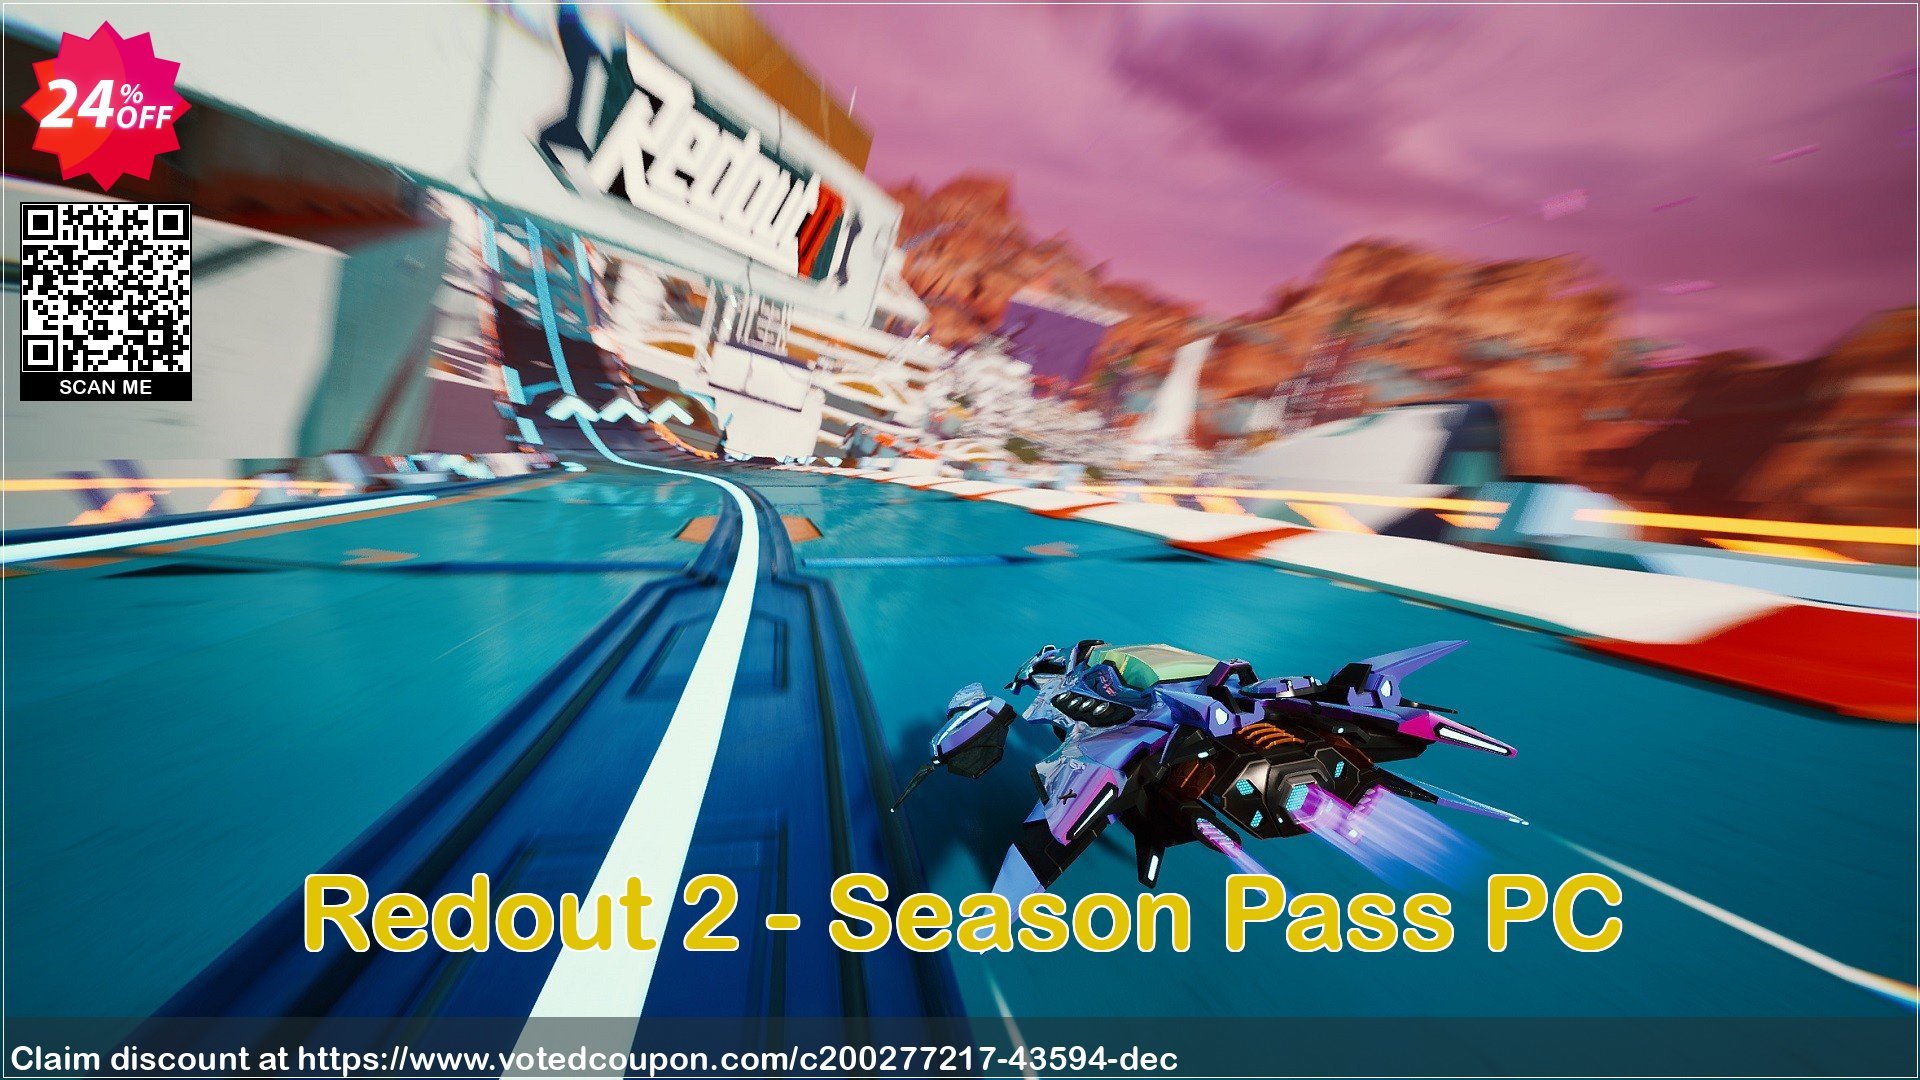 Redout 2 - Season Pass PC Coupon Code May 2024, 24% OFF - VotedCoupon